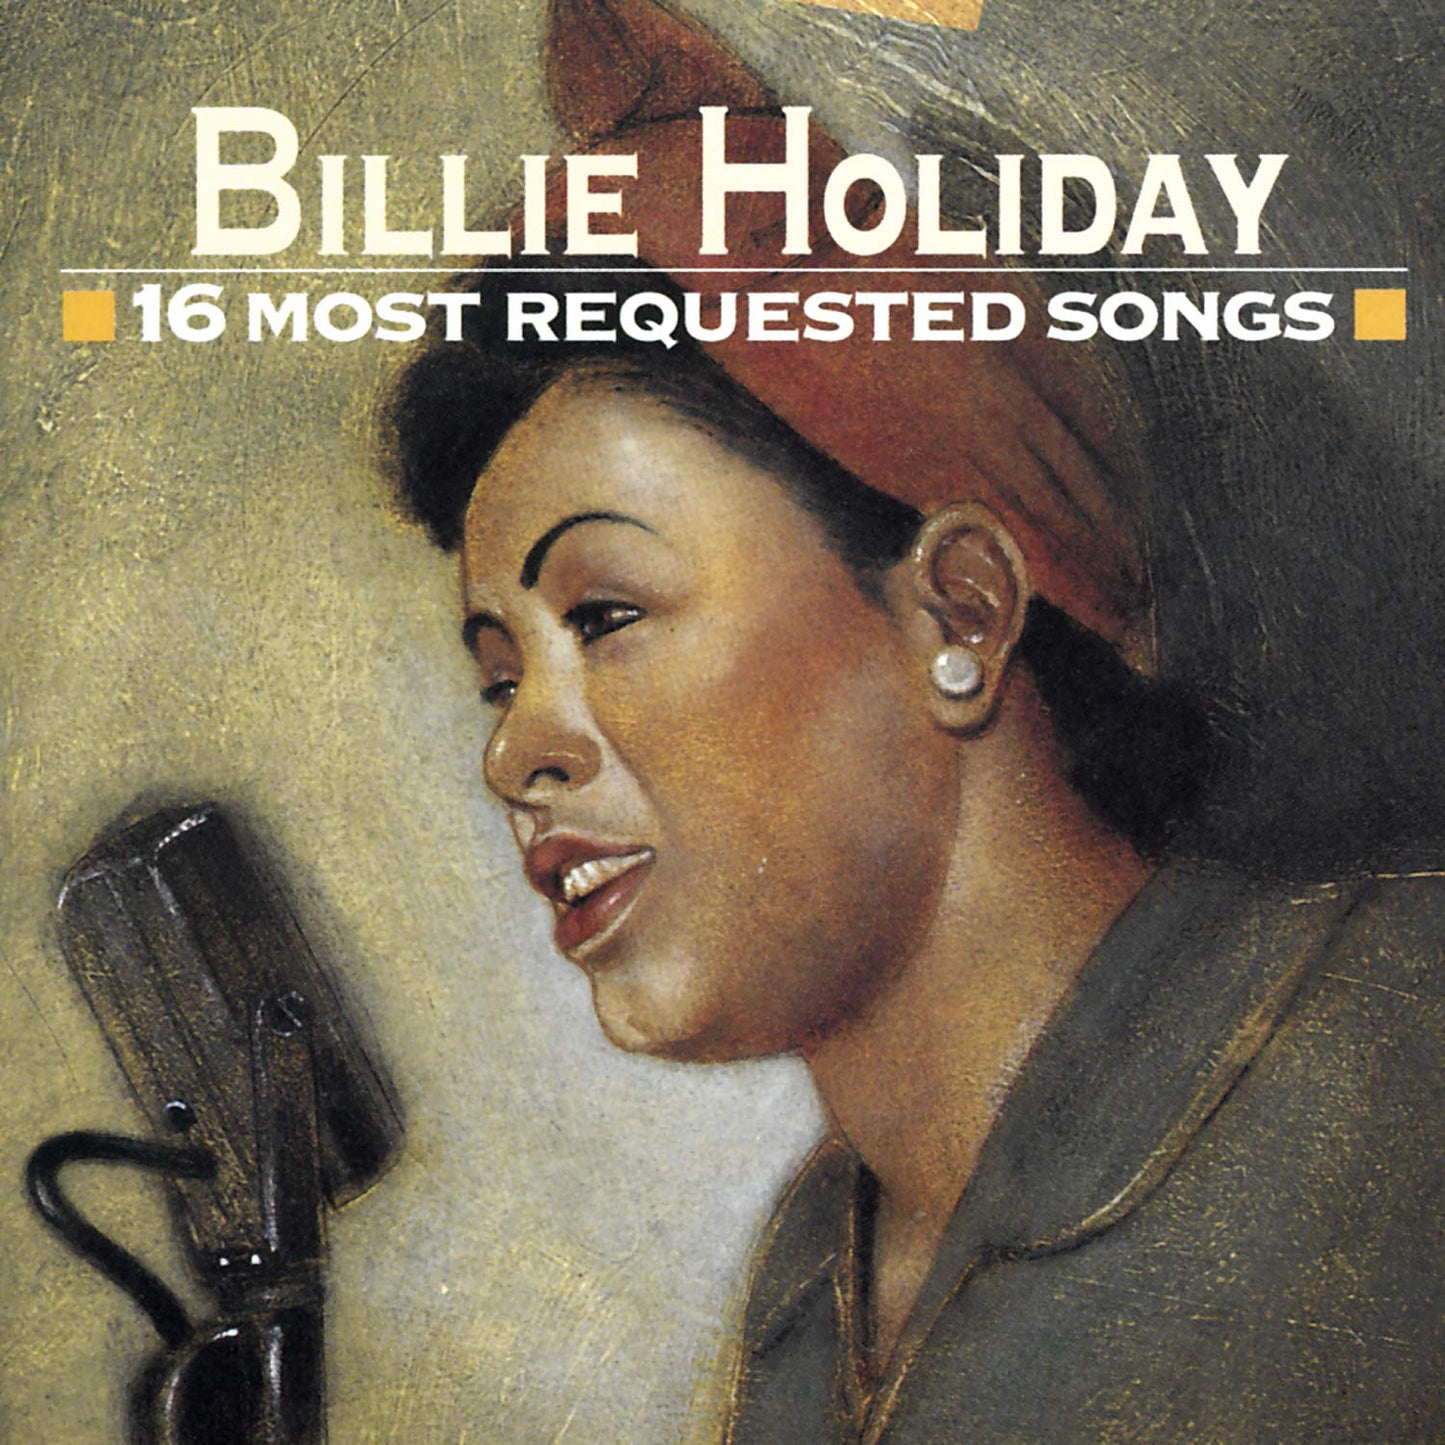 BILLIE HOLIDAY: 16 MOST REQUESTED SONGS